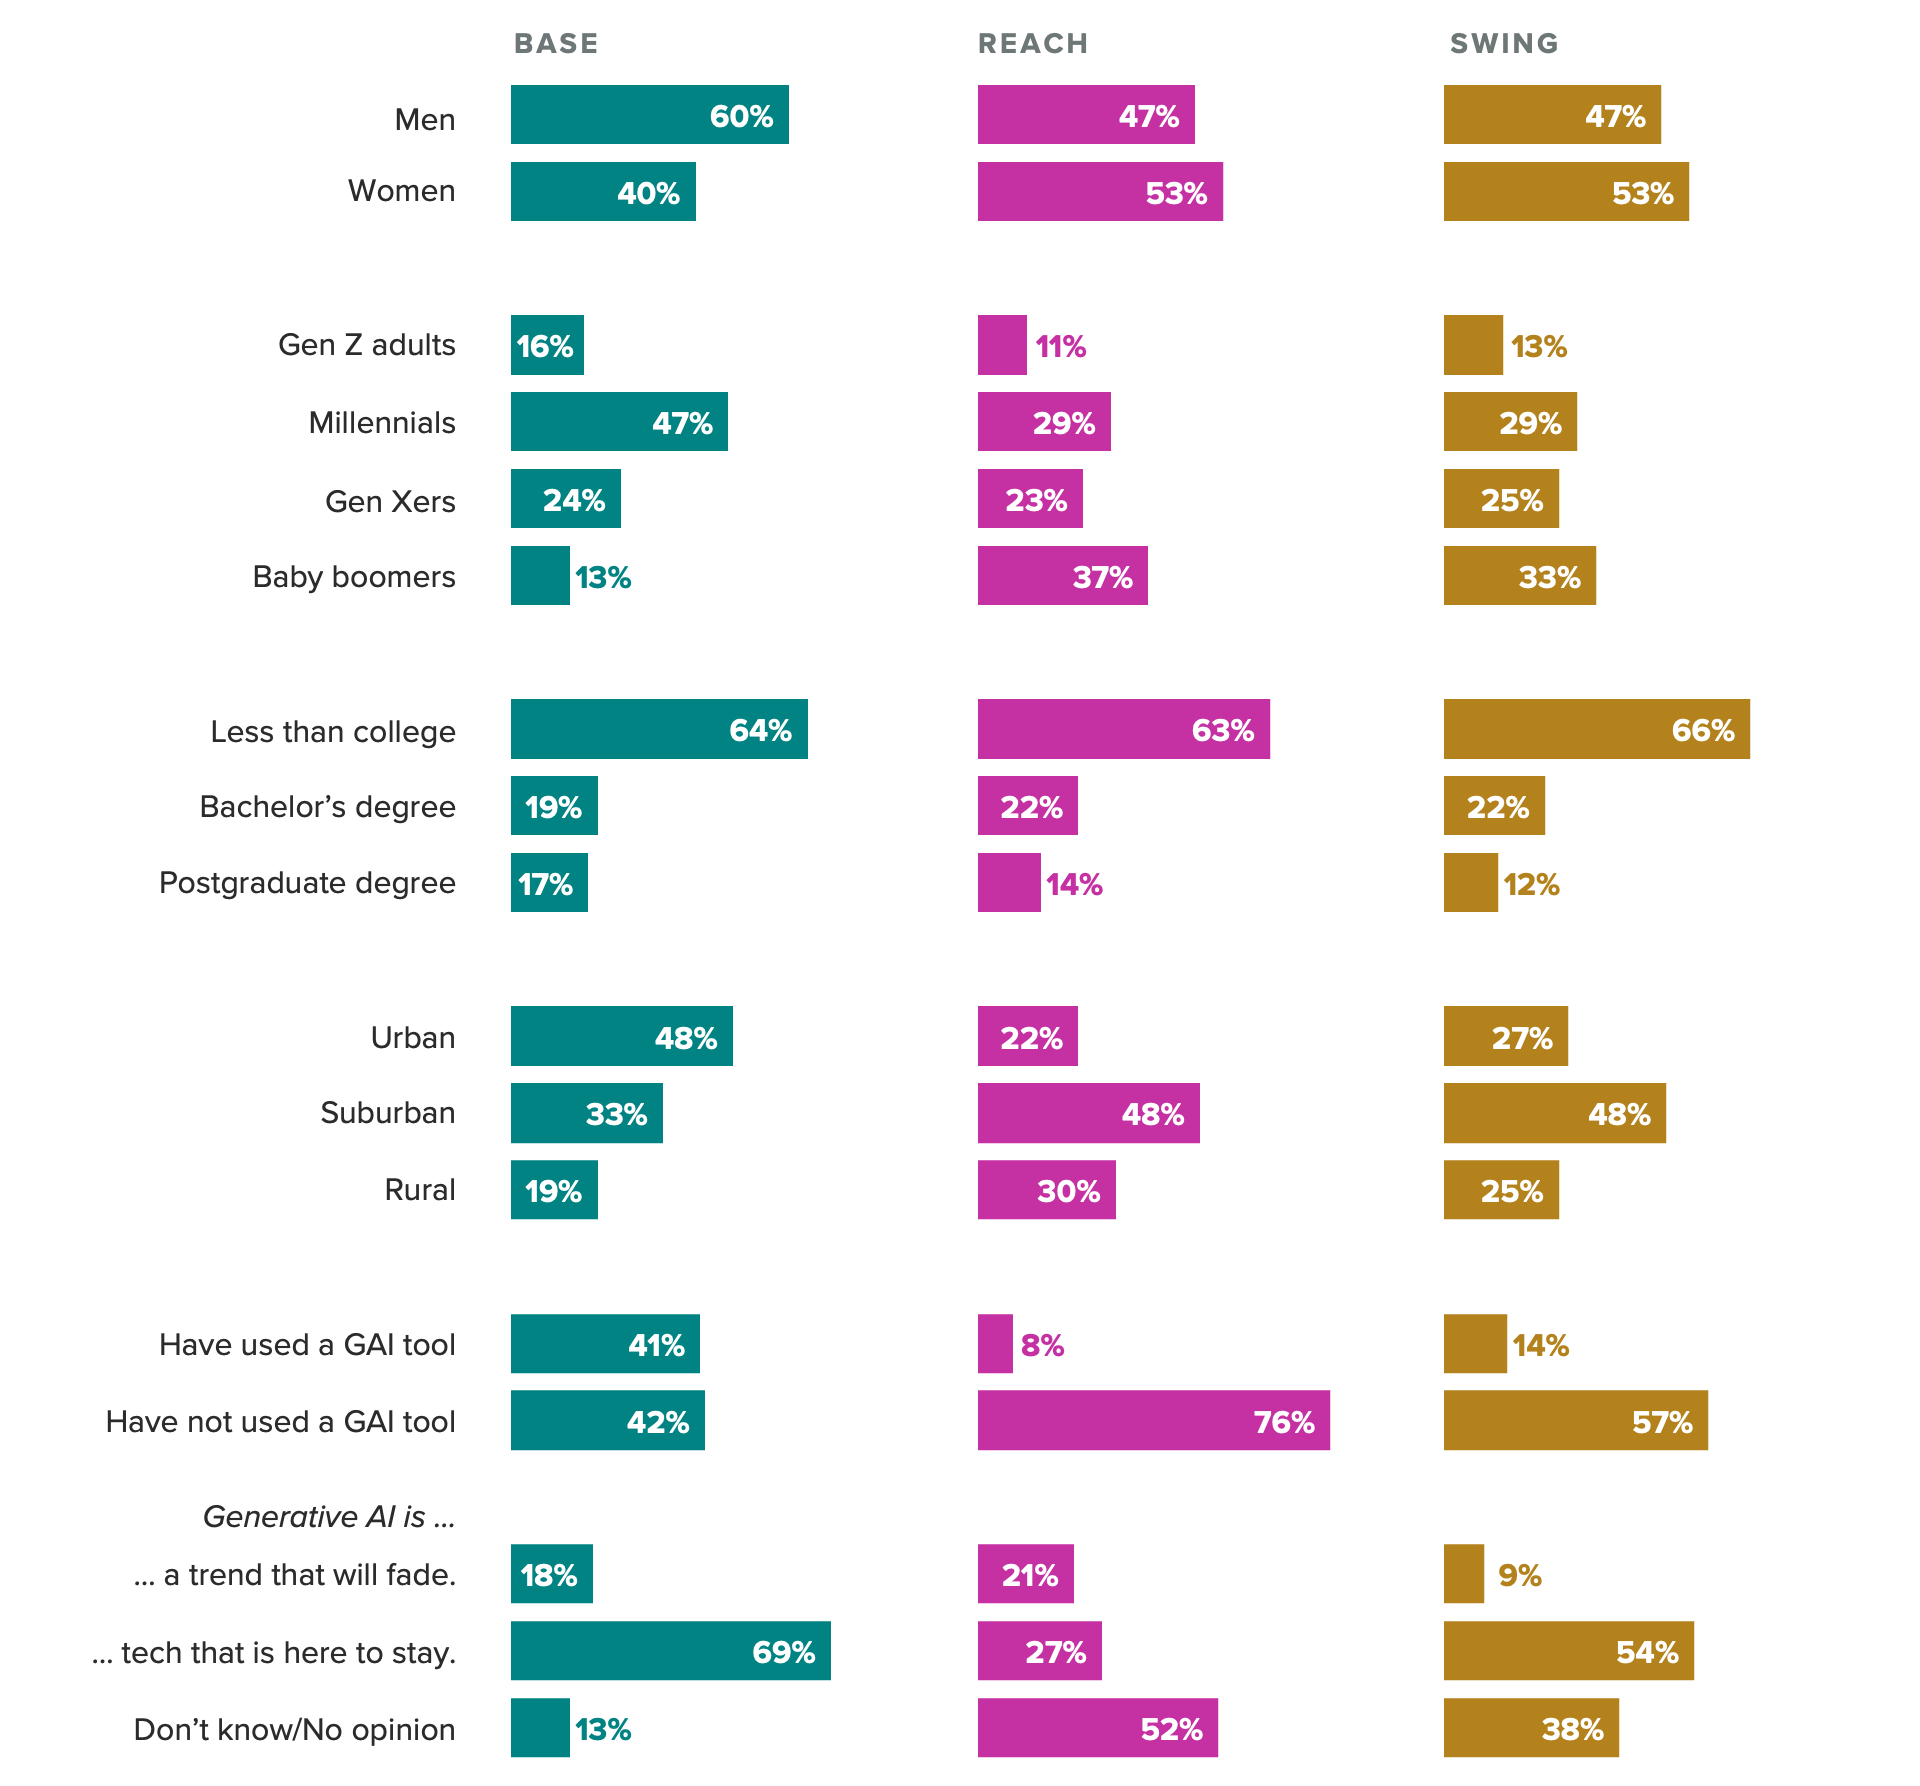 Bar chart of the demographics of the base, reach and swing groups and their trust in generative artificial intelligence, showing AI proponents are young and tech-forward.